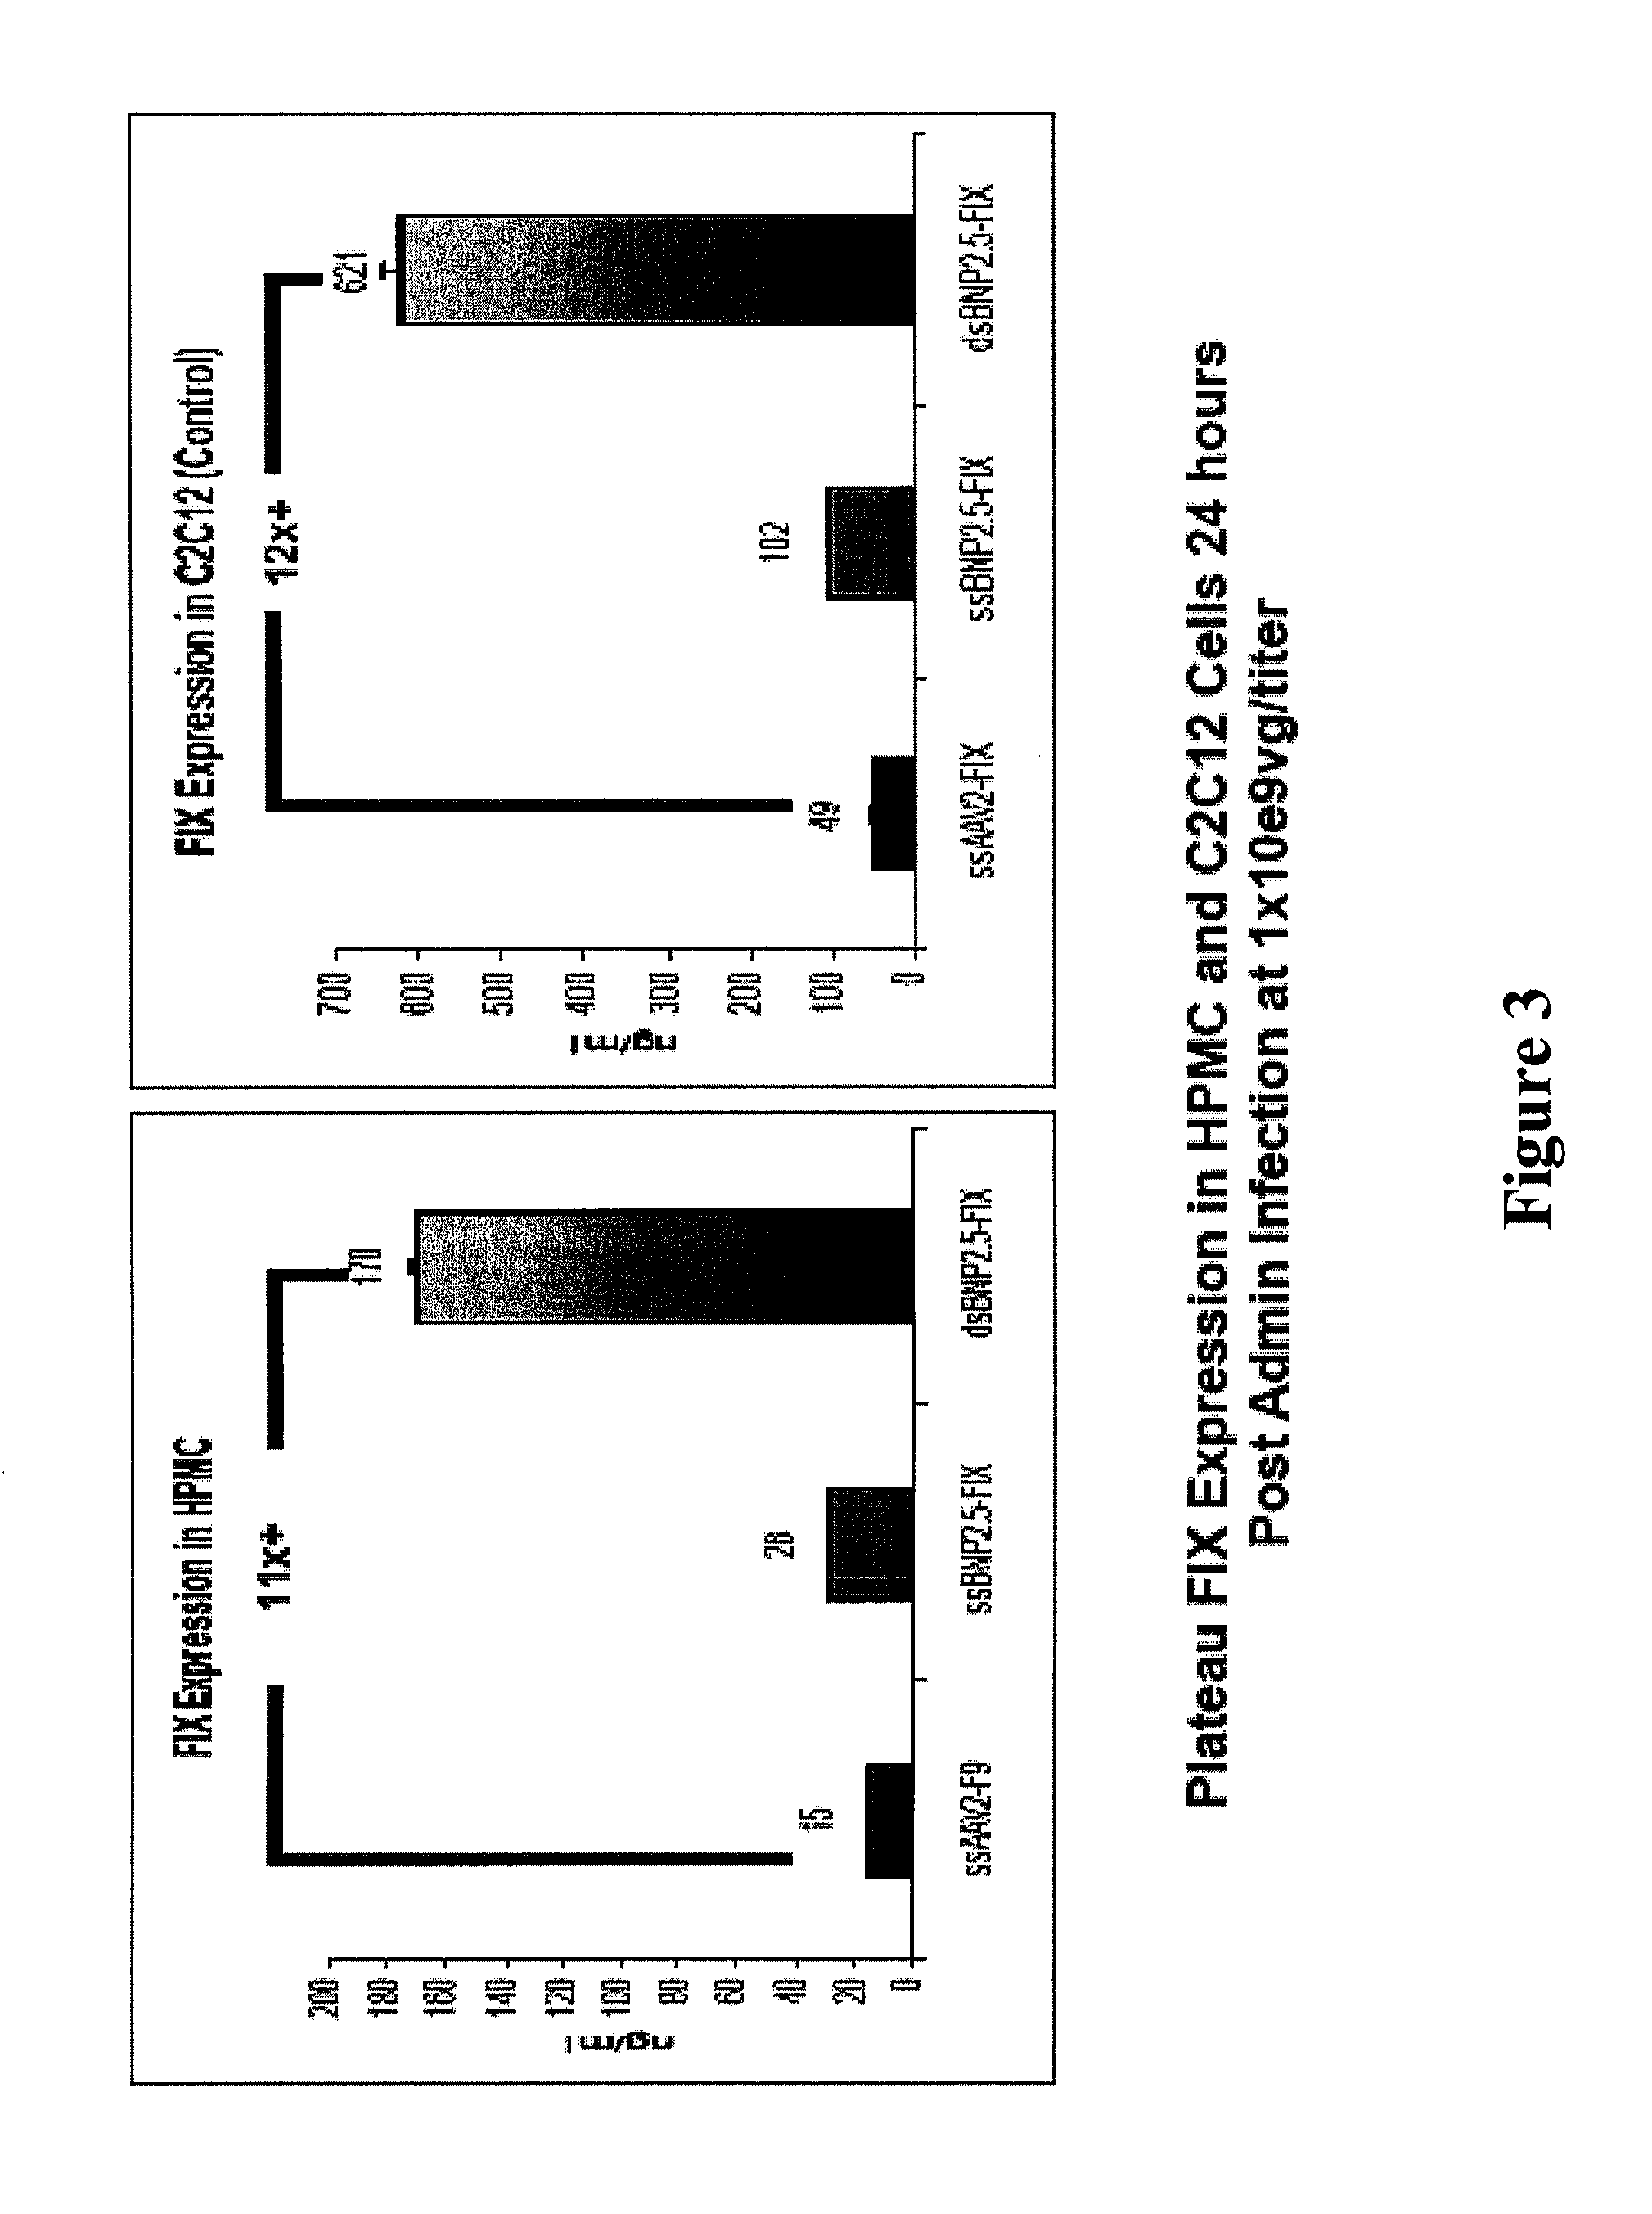 Modified factor VIII and factor IX genes and vectors for gene therapy